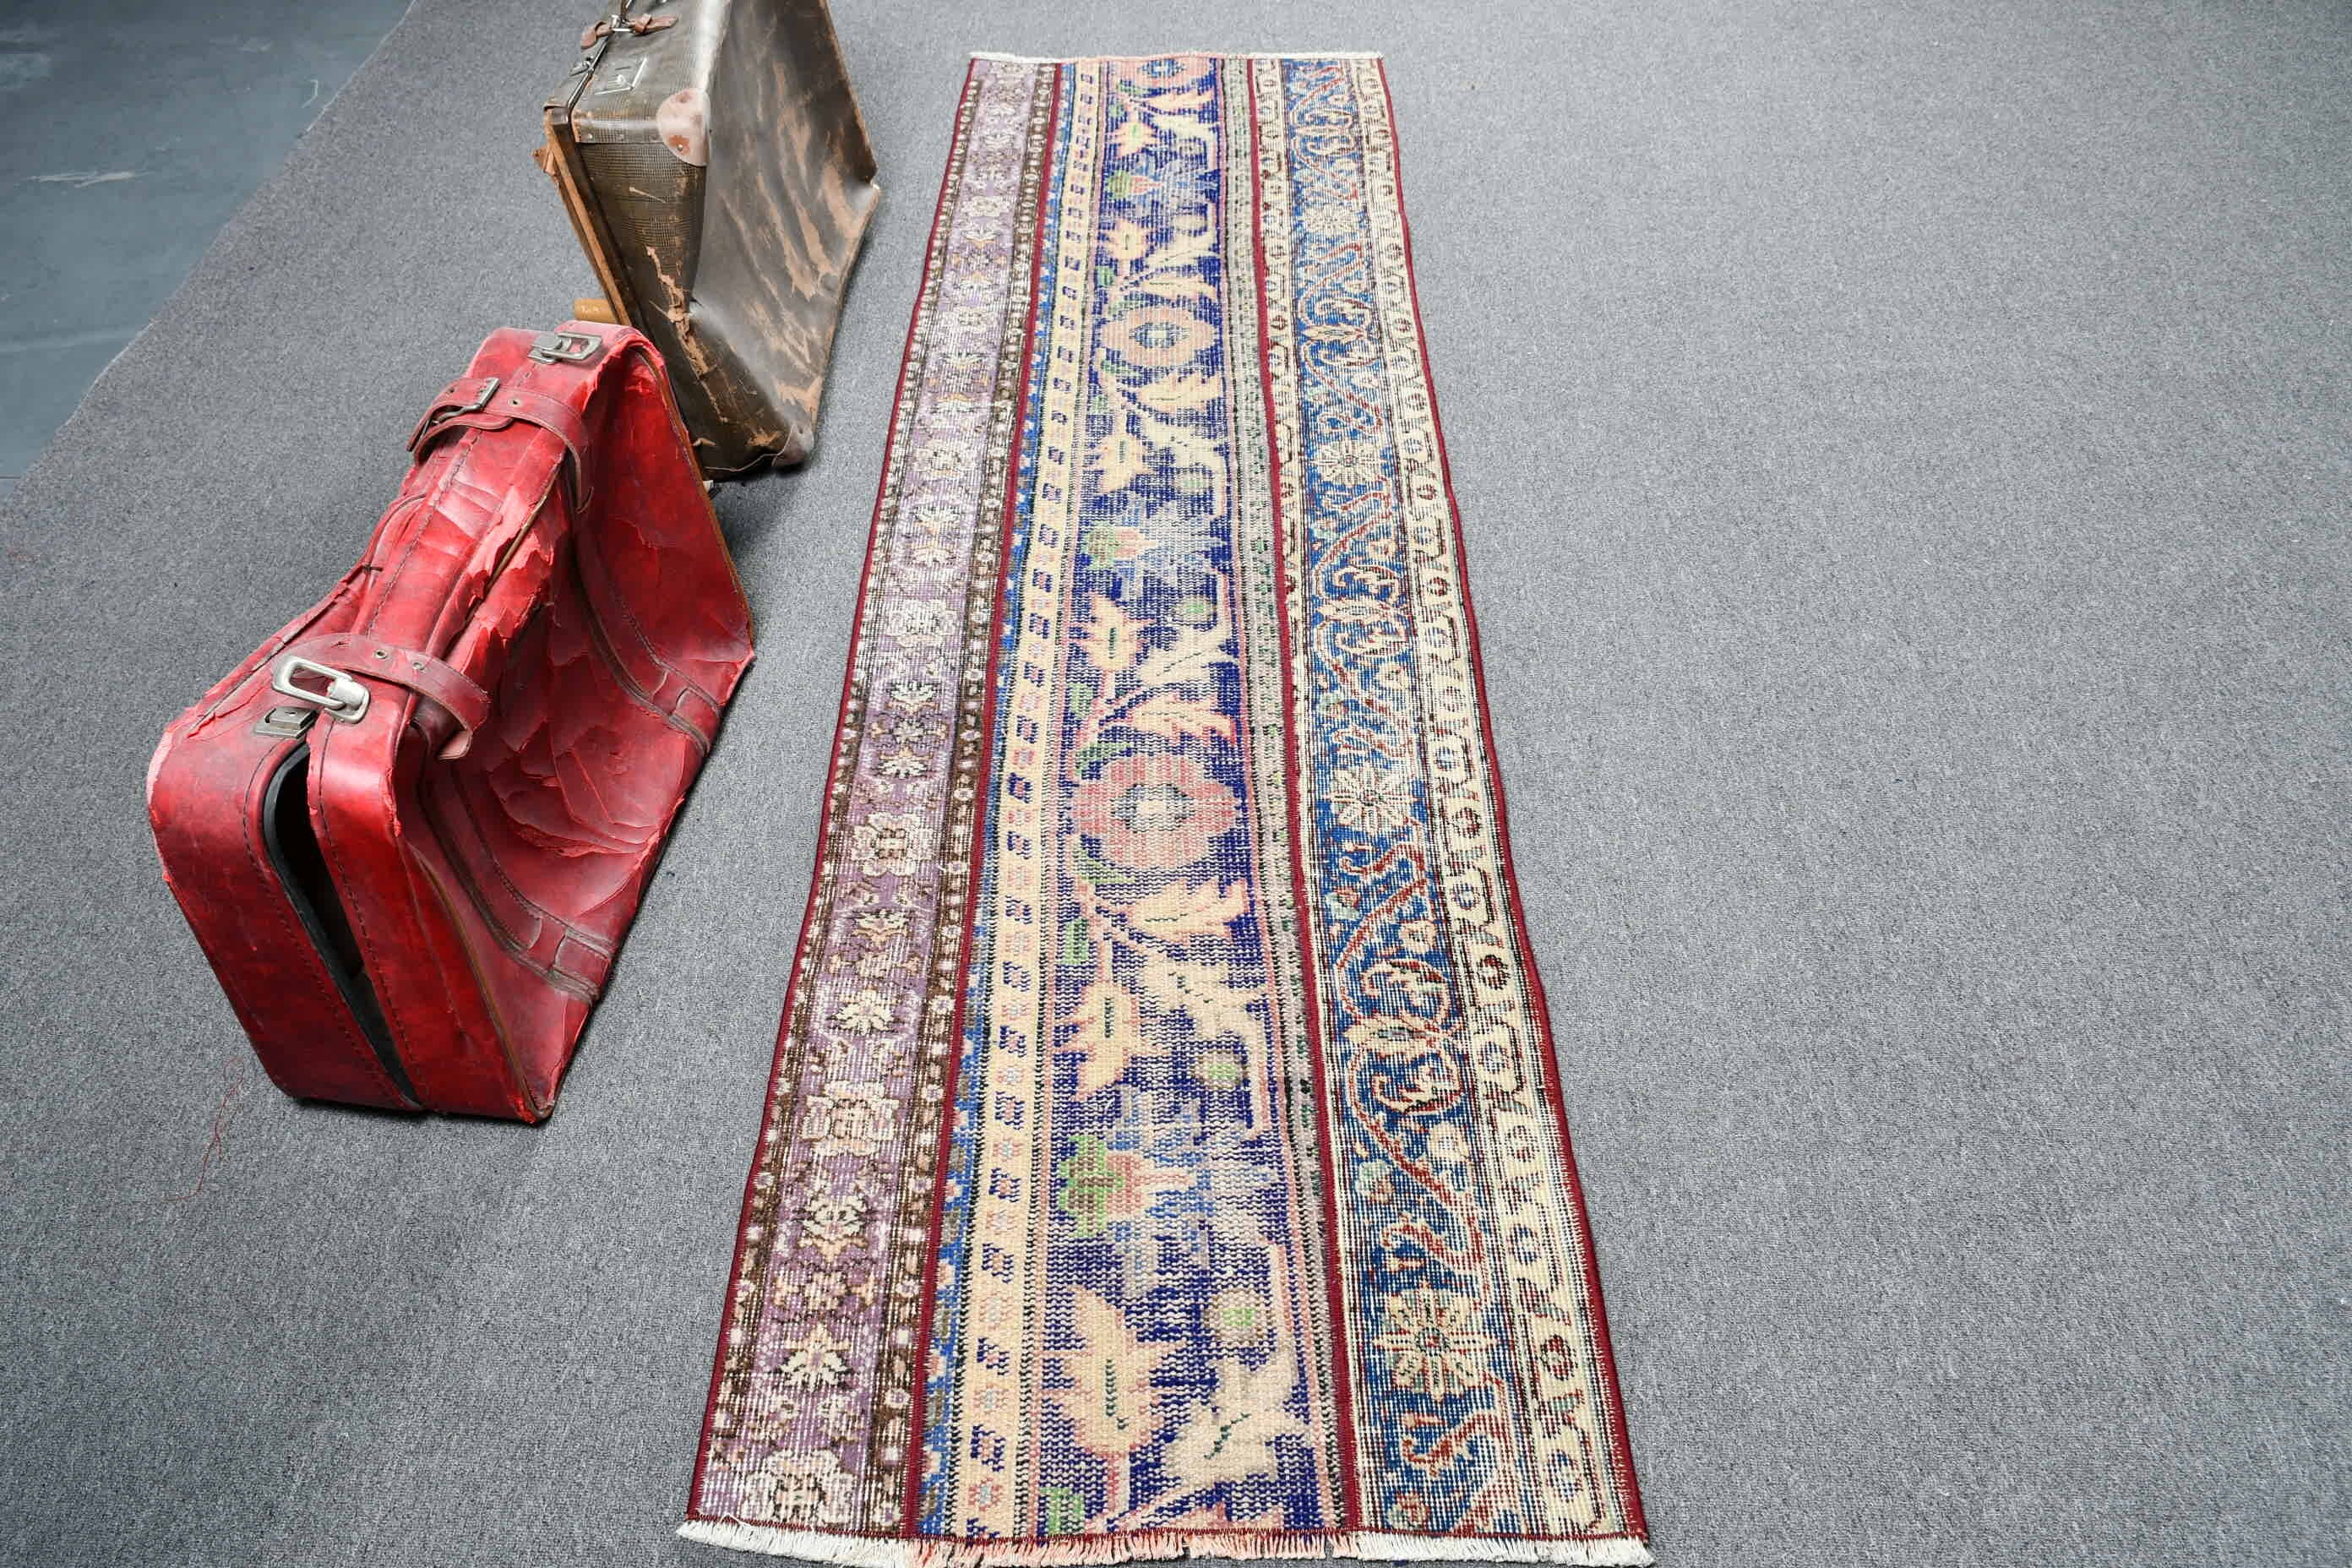 Abstract Rug, 2.2x8 ft Runner Rug, Turkish Rug, Moroccan Rugs, Kitchen Rugs, Stair Rugs, Vintage Rug, Home Decor Rugs, Blue Oriental Rugs